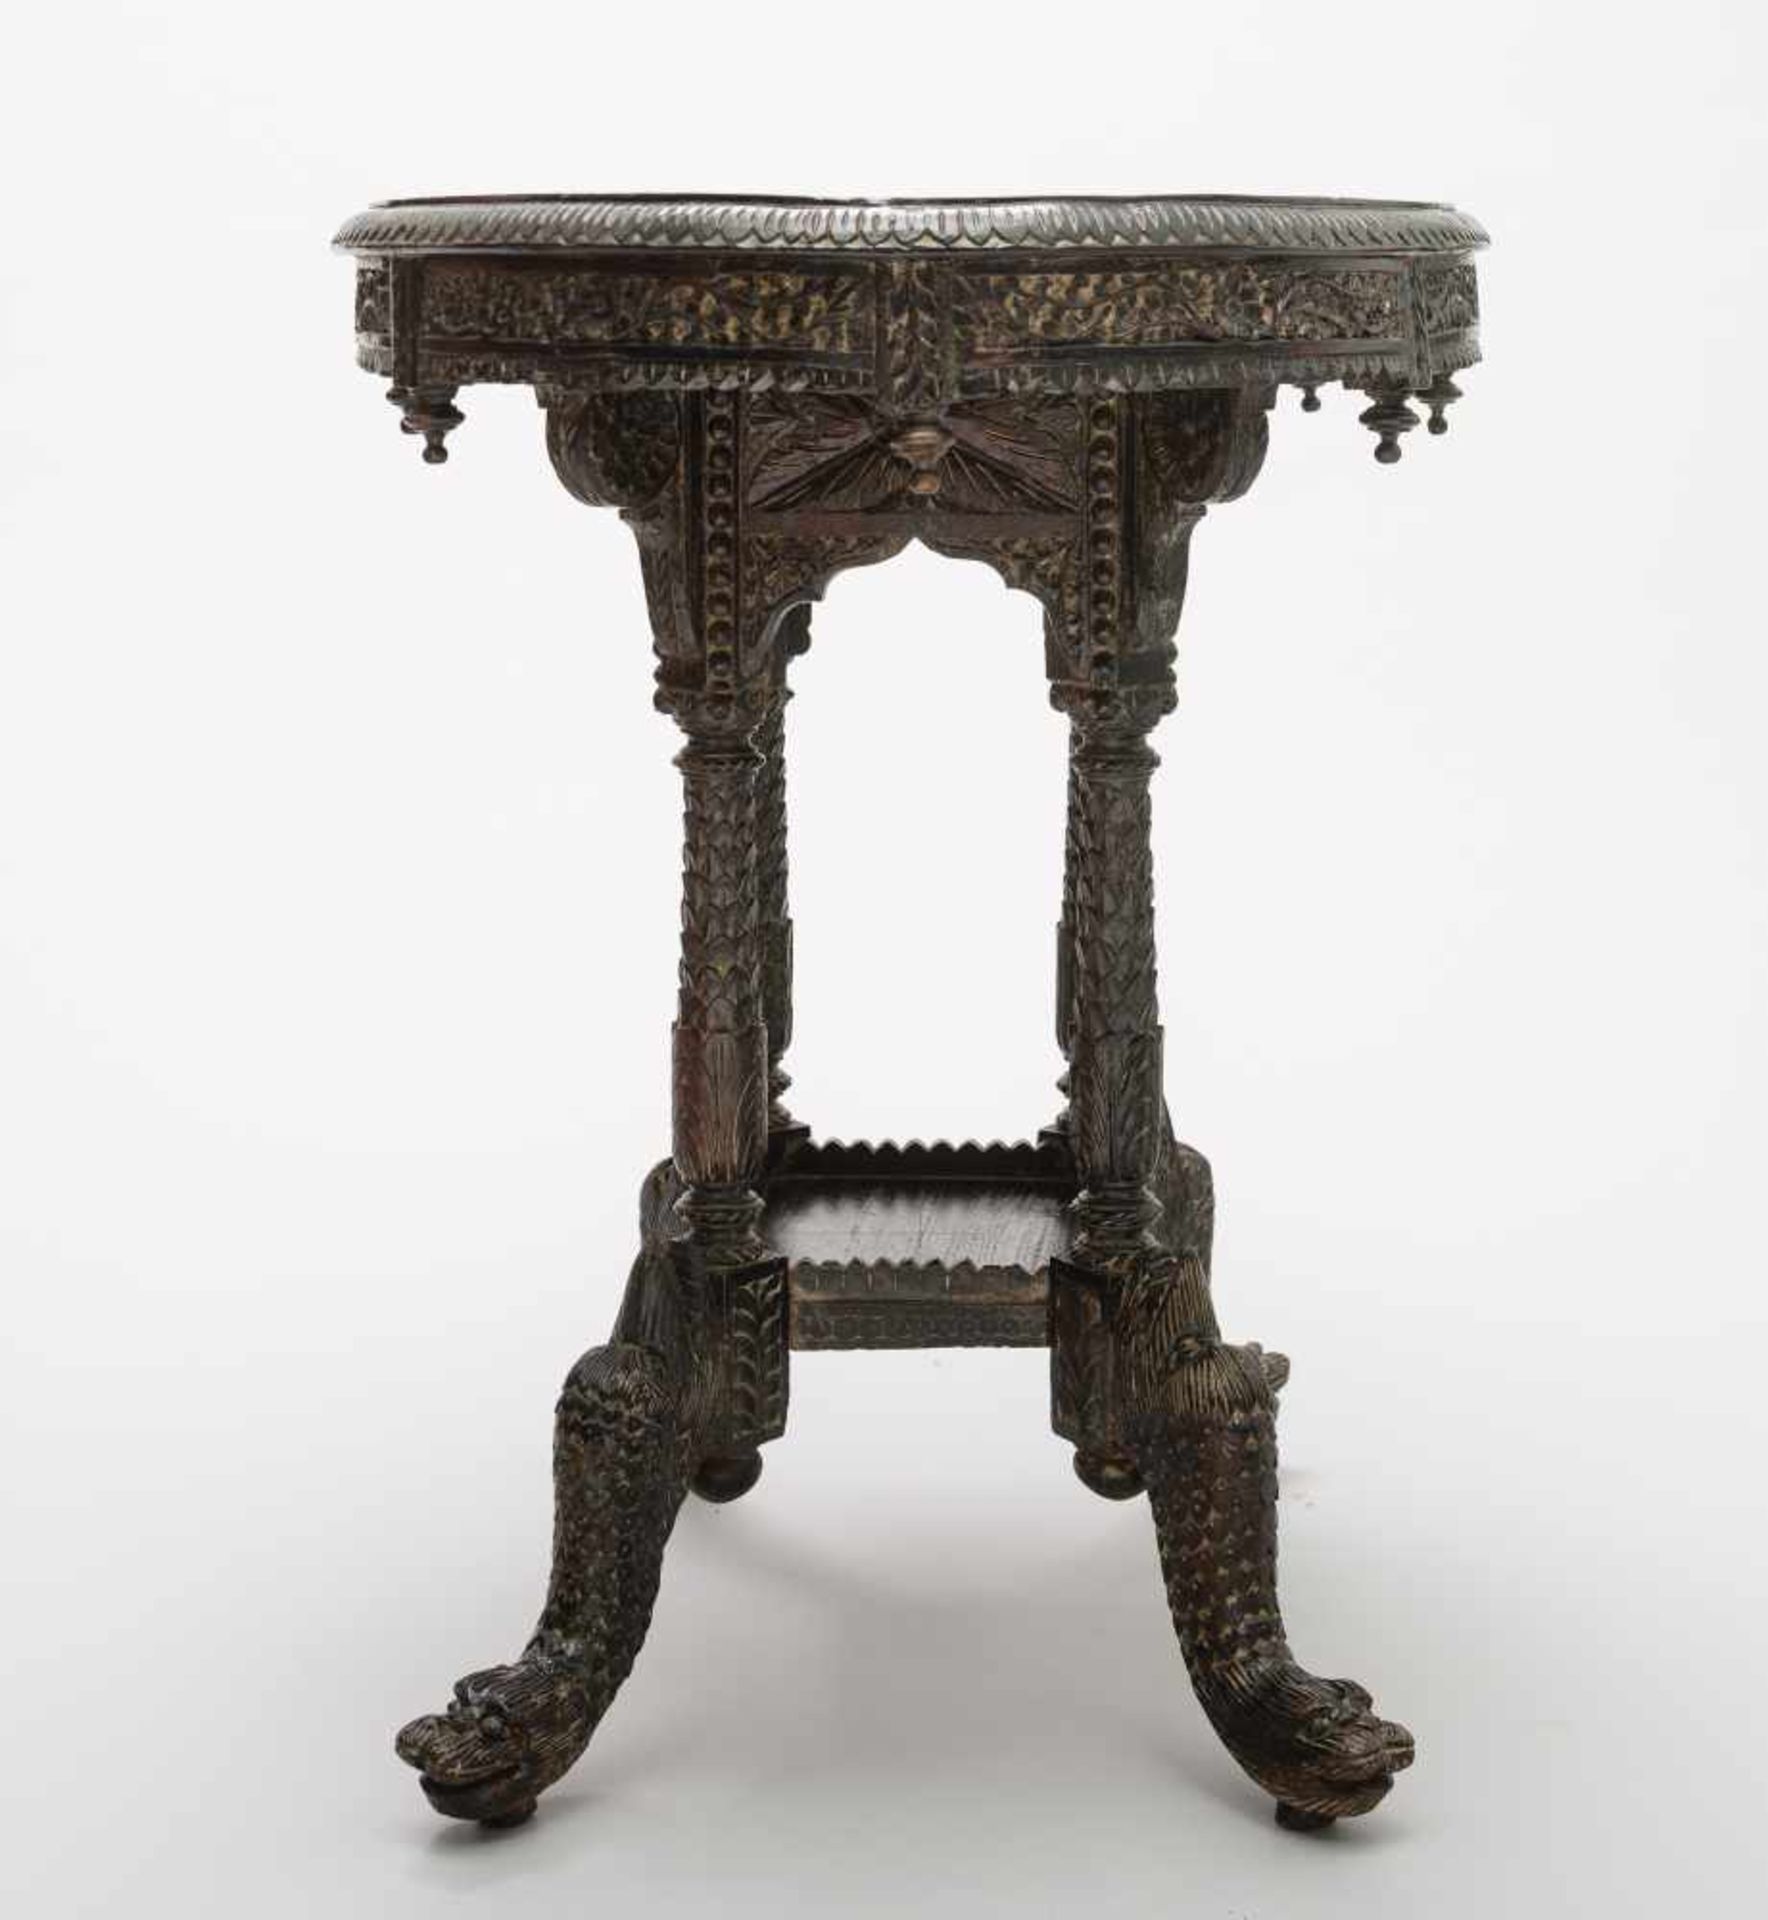 TABLE WITH RICH CARVED DECORRosewood India, 19th cent. Oval round surface with a wide rim - Image 7 of 8